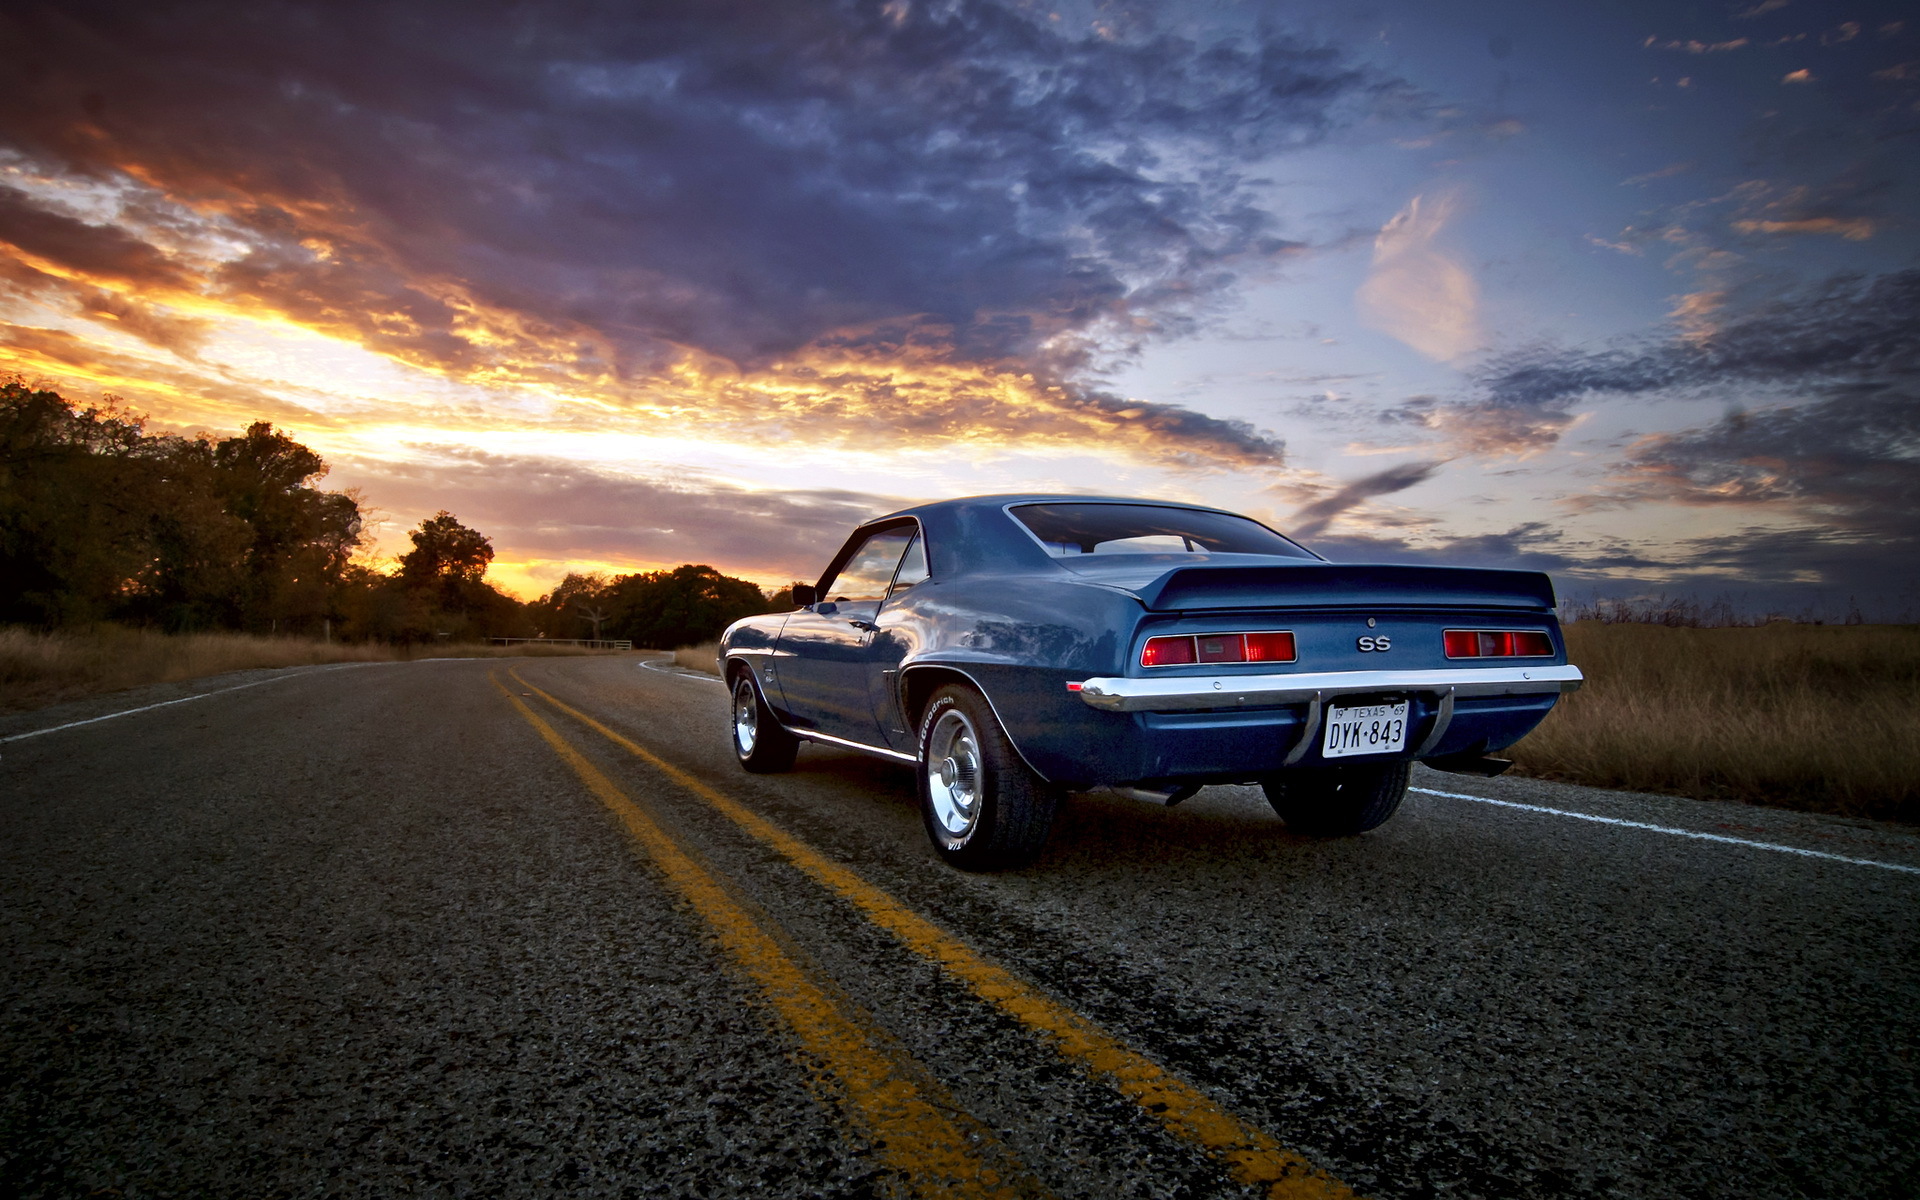 Chevy, Camaro, Ss, Vehicles, Auto, Chevrolet, Retro, Classic, Muscle, Wheels, Roads, Sunset, Sunrise, Sky, Clouds, Trees, Chrome, Stripes Wallpaper HD / Desktop and Mobile Background